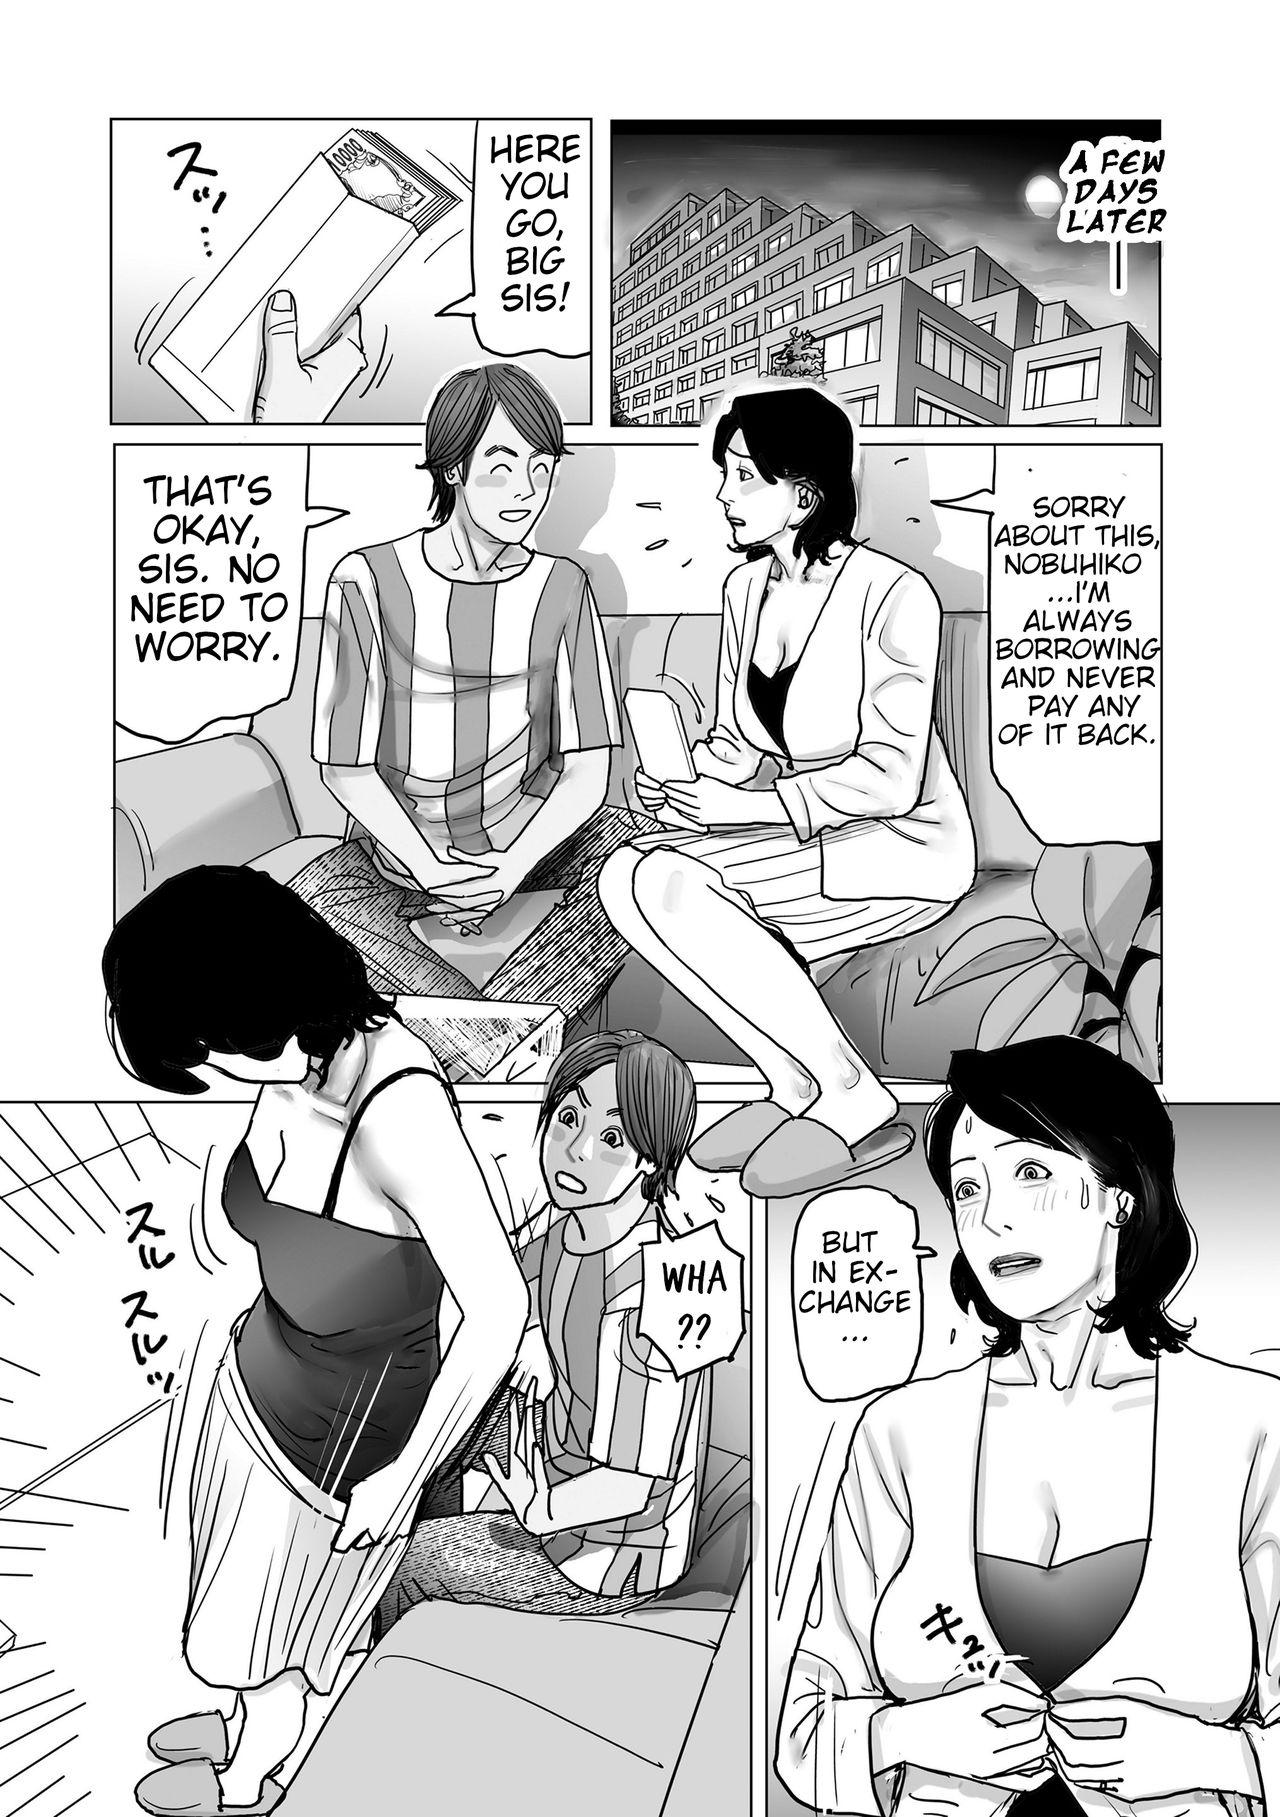 Bald Pussy Kinshinkan De Seikatsuhi wo Eru Hizunda Kyodai | The Twisted Big Sister Who does Incest With Her Little Brother to Get By Classic - Page 9